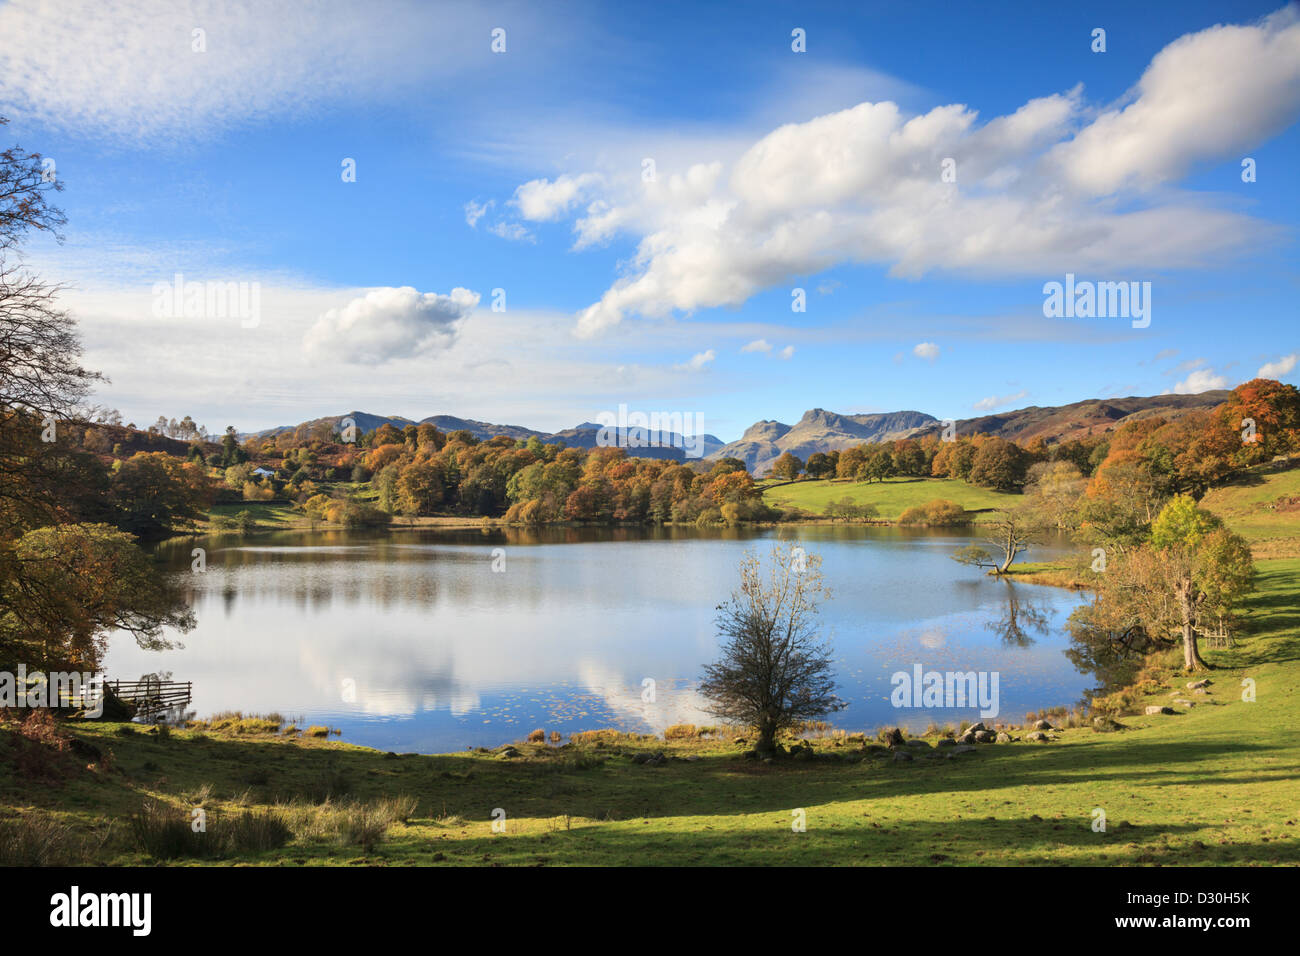 Loughrigg Tarn in the Lake District National Park, with the Langdale Pikes visible in the background. Stock Photo